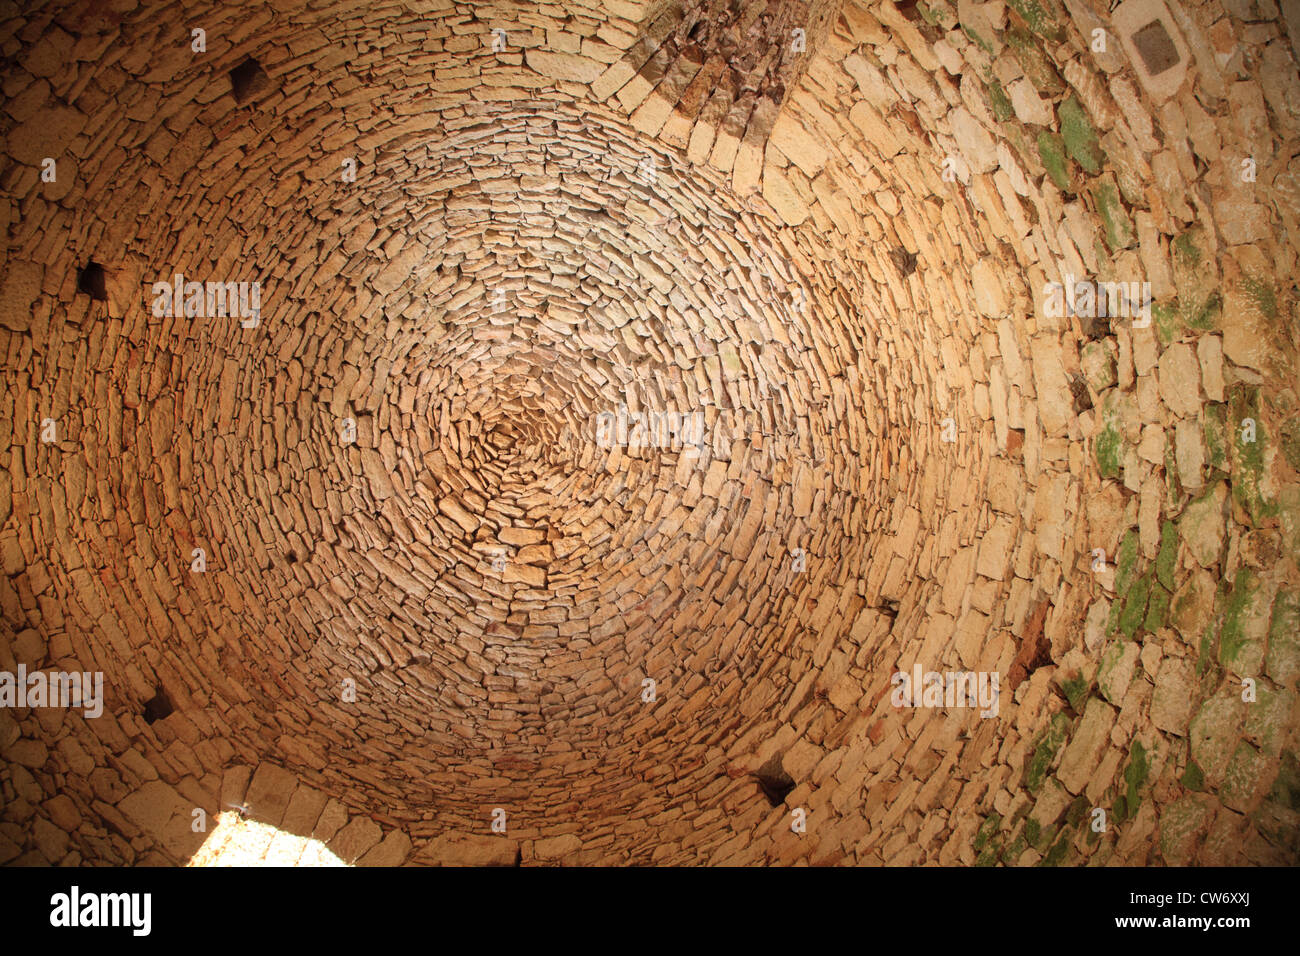 Looking up at the arched dry stone ceiling inside the Chateau de Bonaguil Stock Photo